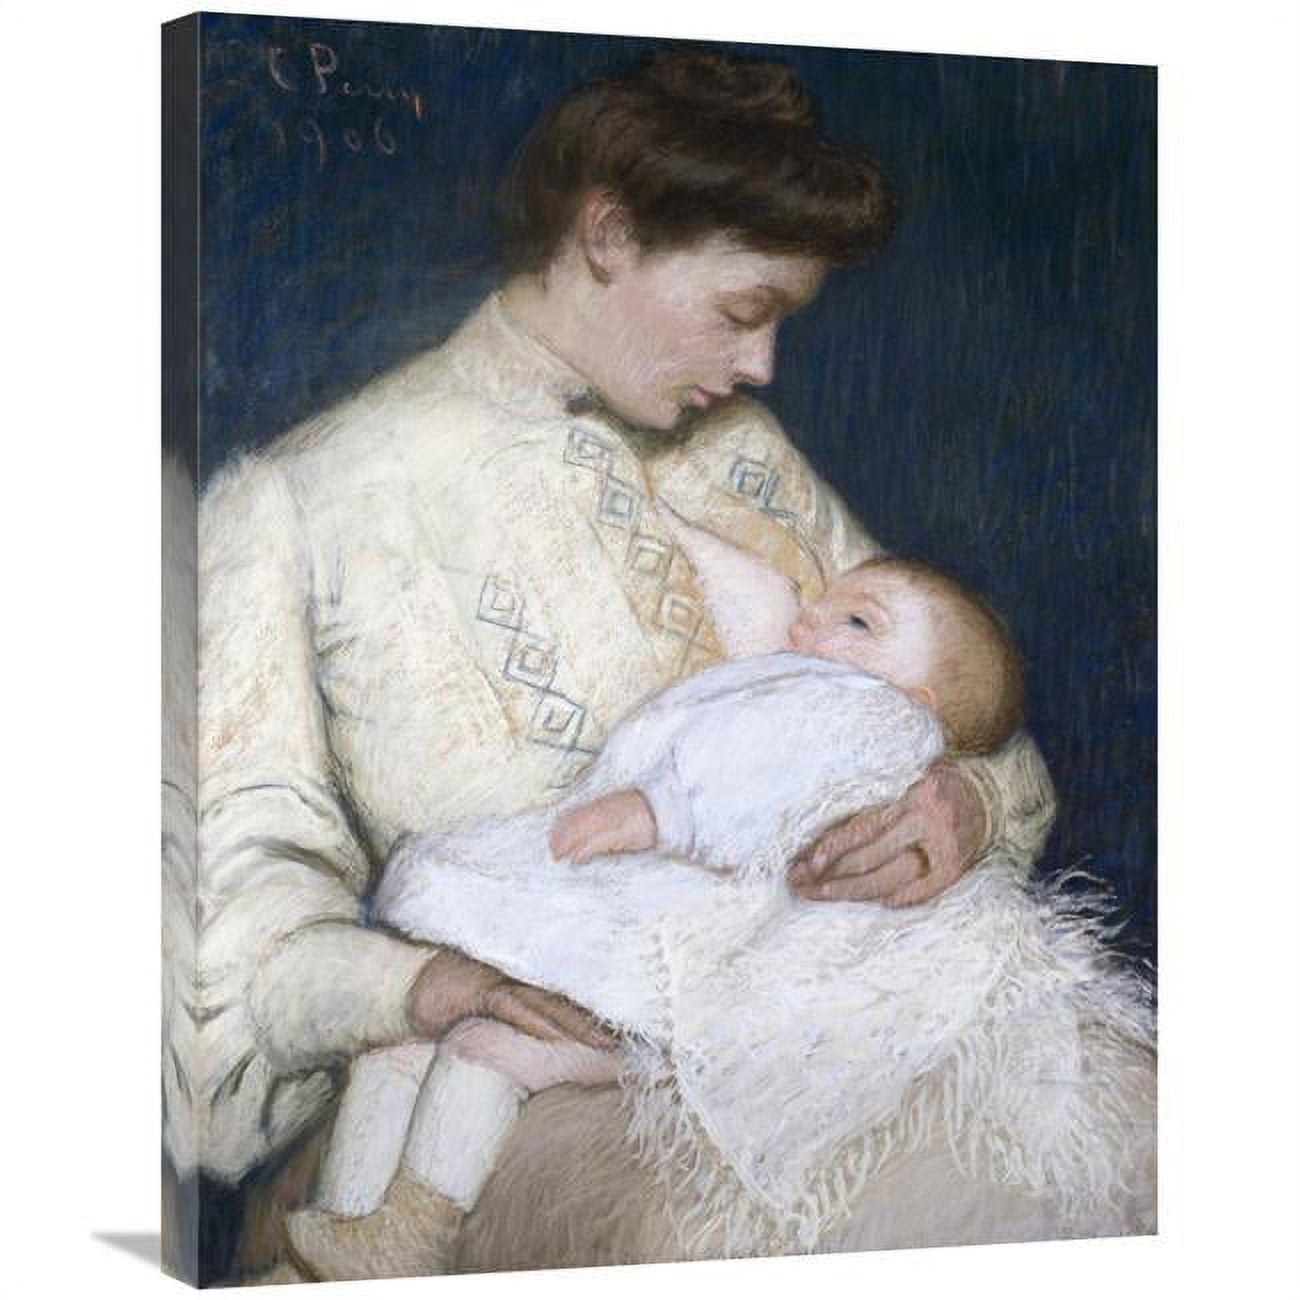 30 in. Nursing the Baby Art Print - Lilla Cabot Perry -  JensenDistributionServices, MI1274267